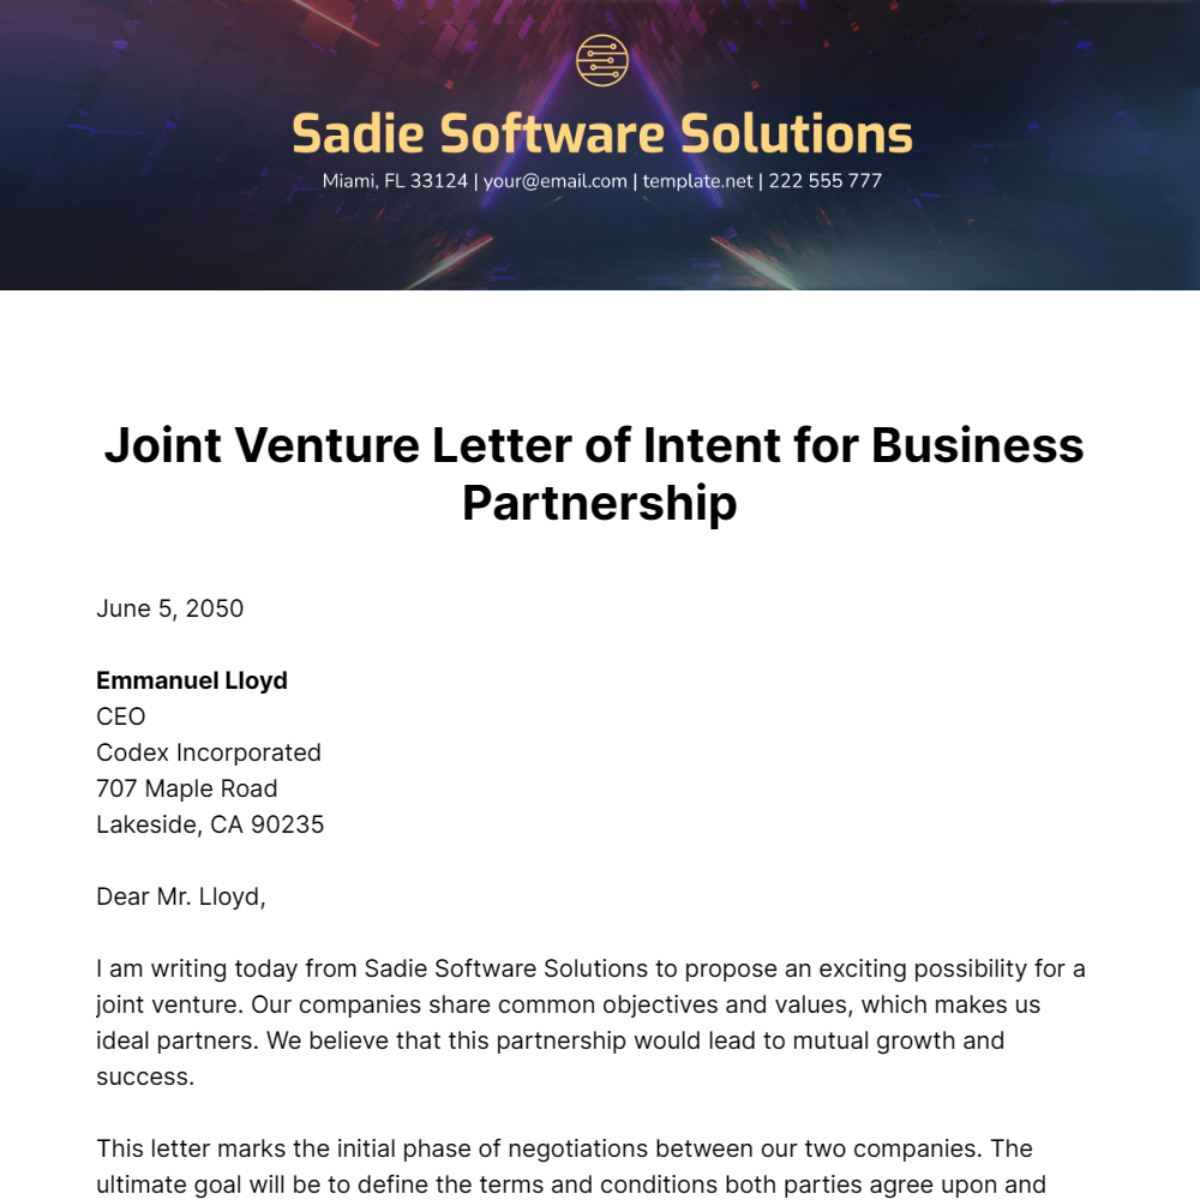 Joint Venture Letter of Intent for Business Partnership Template